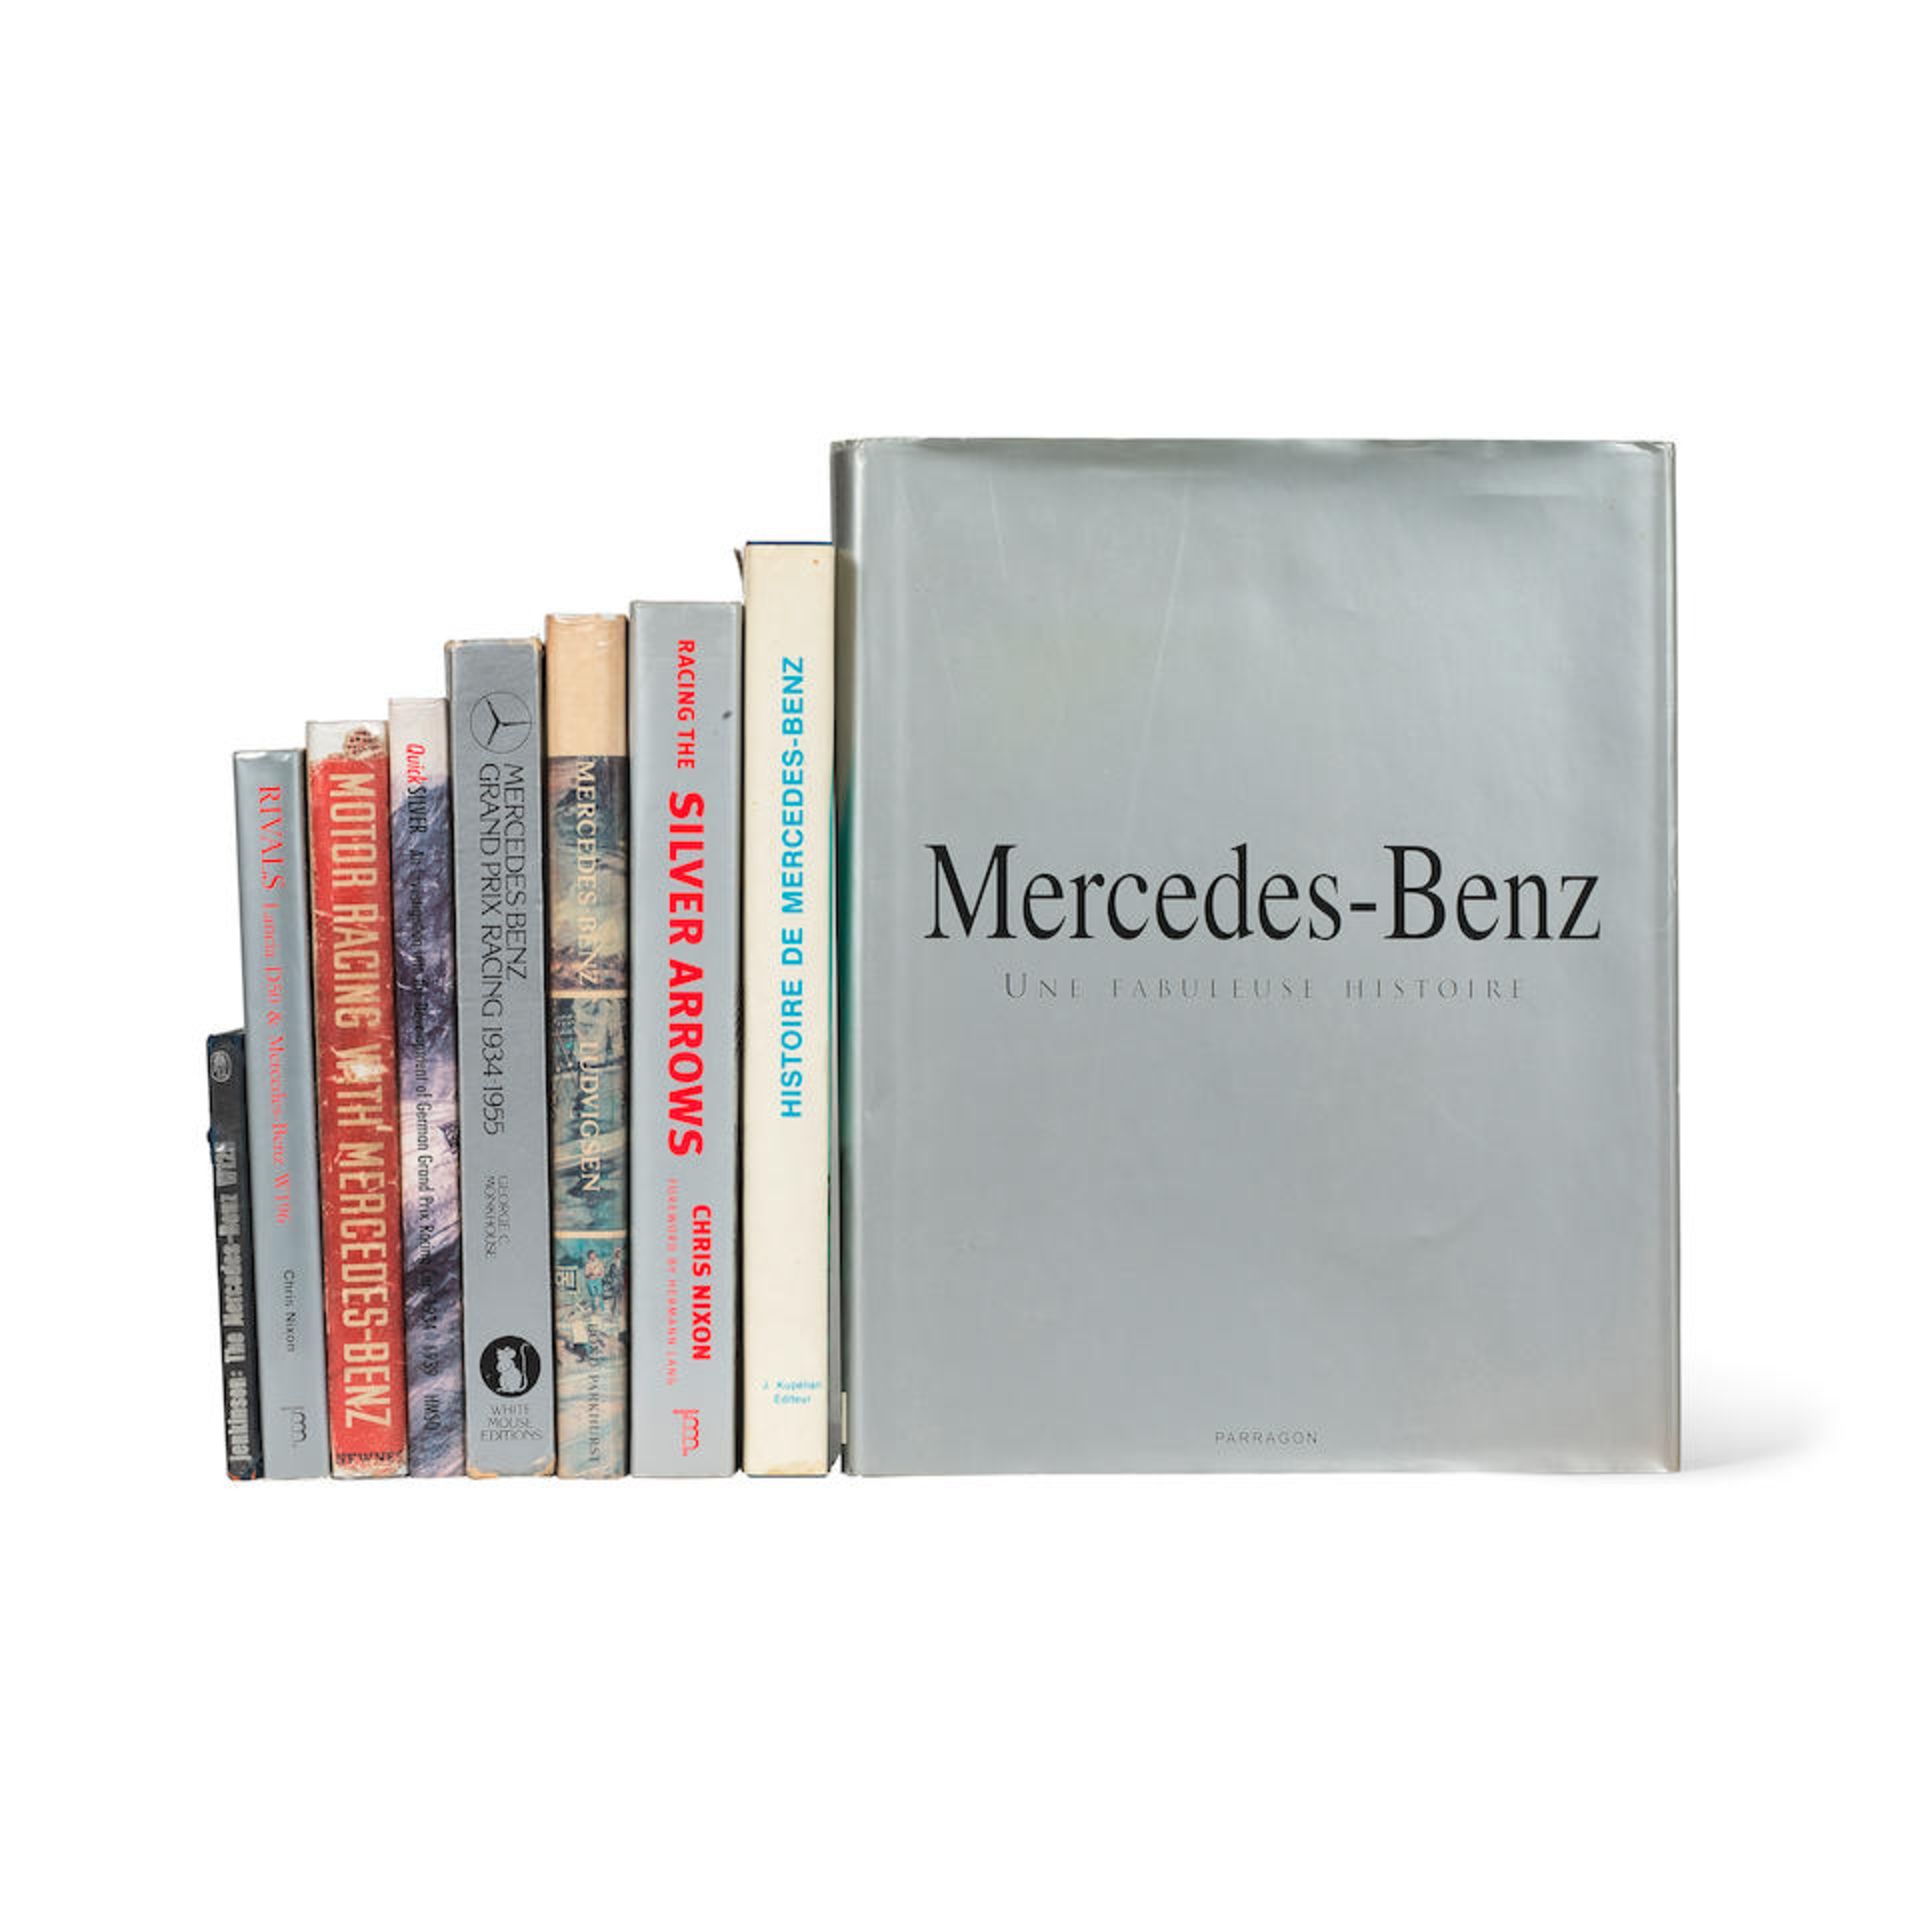 MERCEDES-BENZ Books about the brand